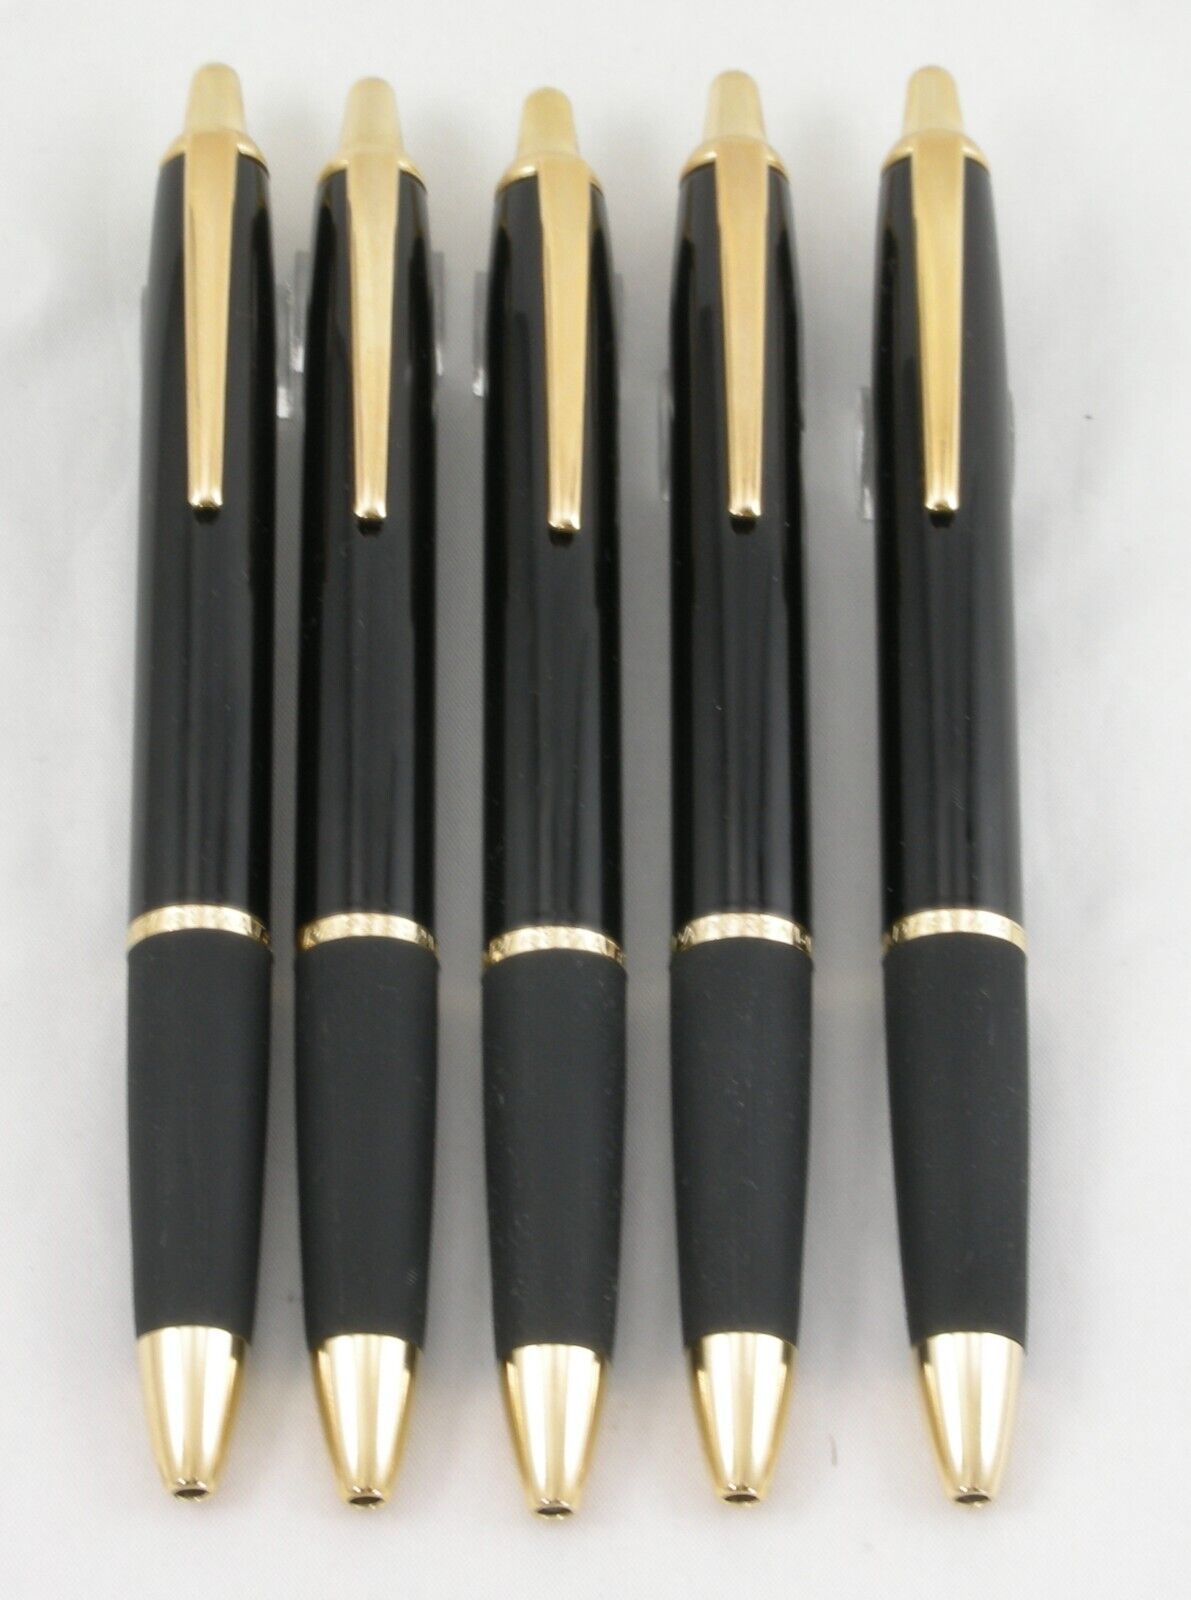 5 New Paper Mate Black Lacquer & Gold Button-Actuated Ballpoint Pens - Unused